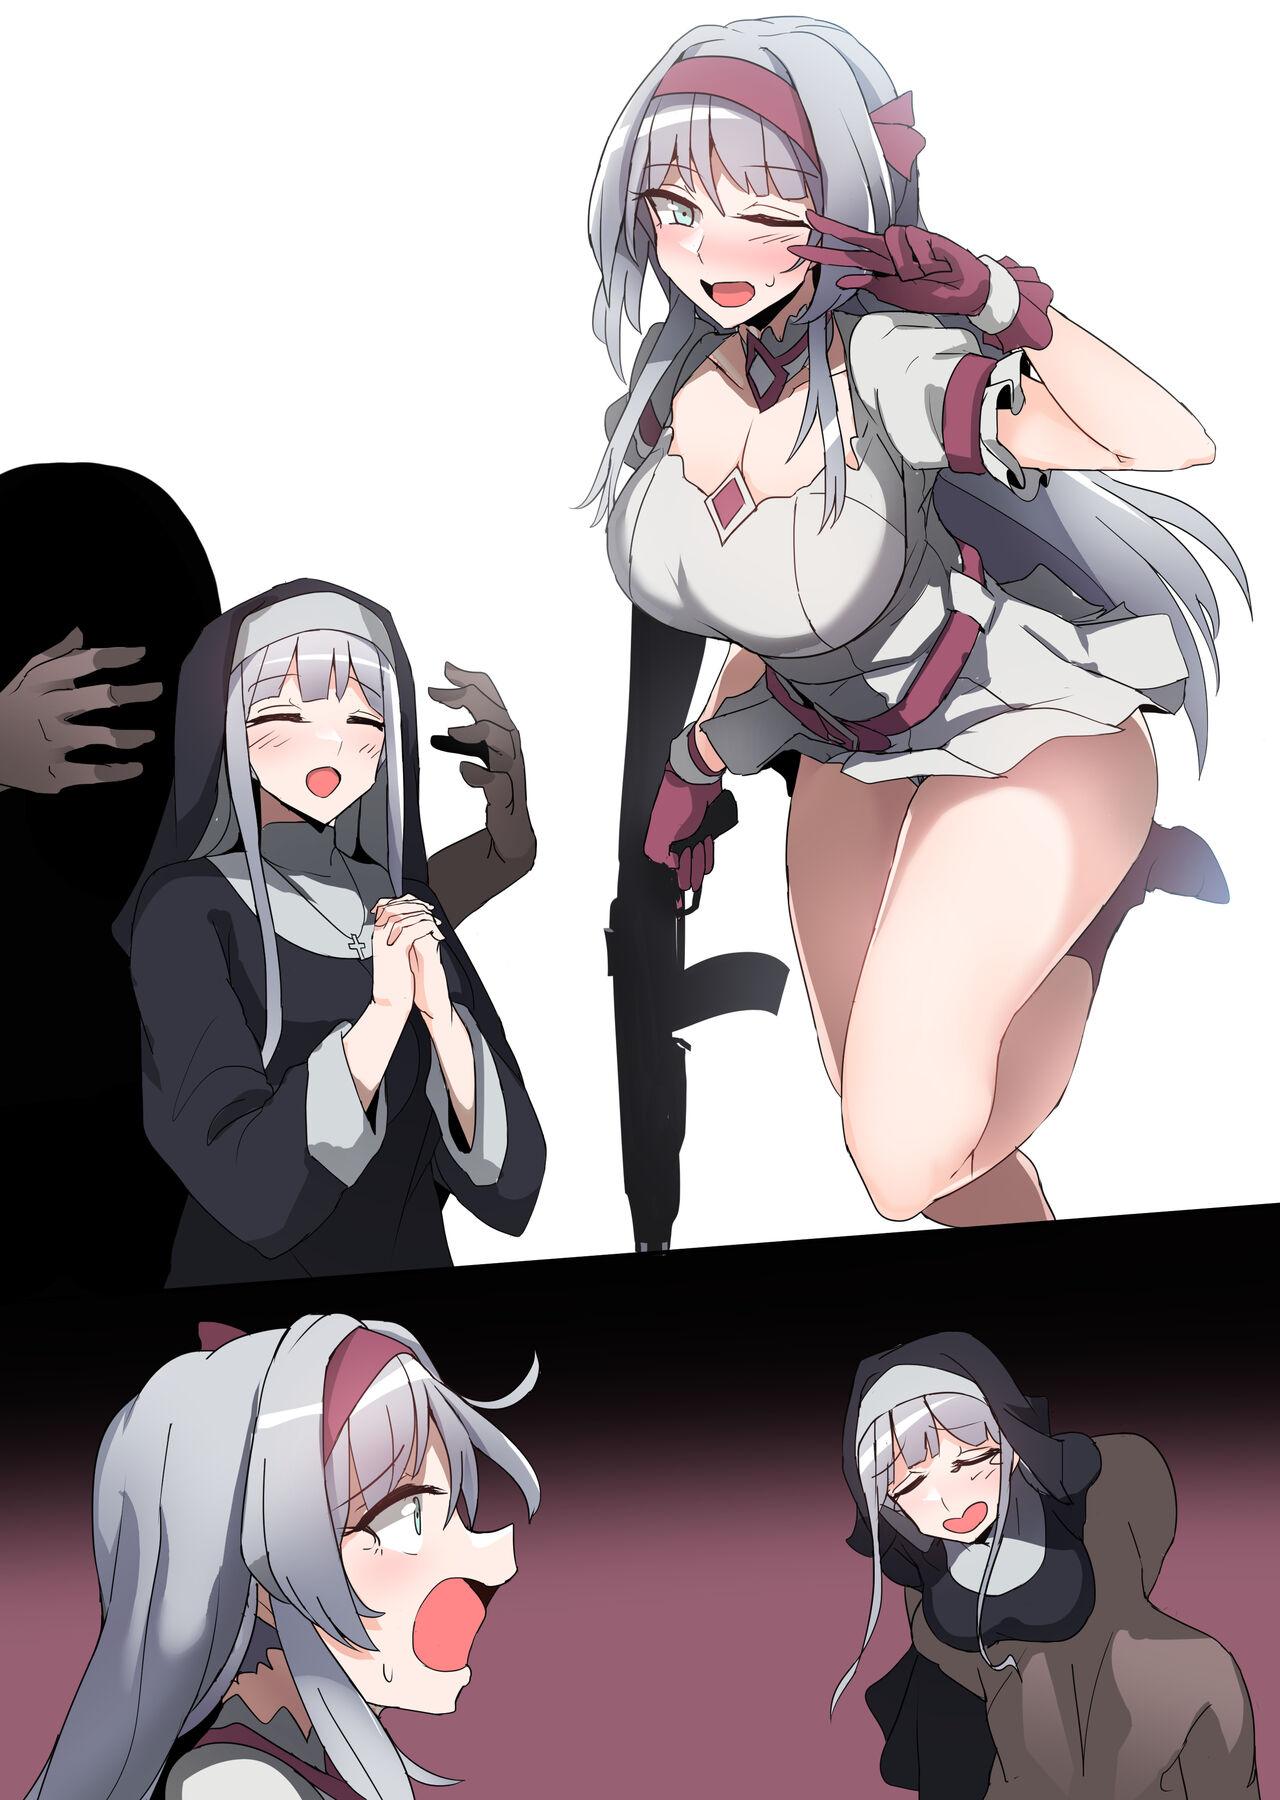 Asians To Be Continued.... - Girls frontline Barely 18 Porn - Picture 1